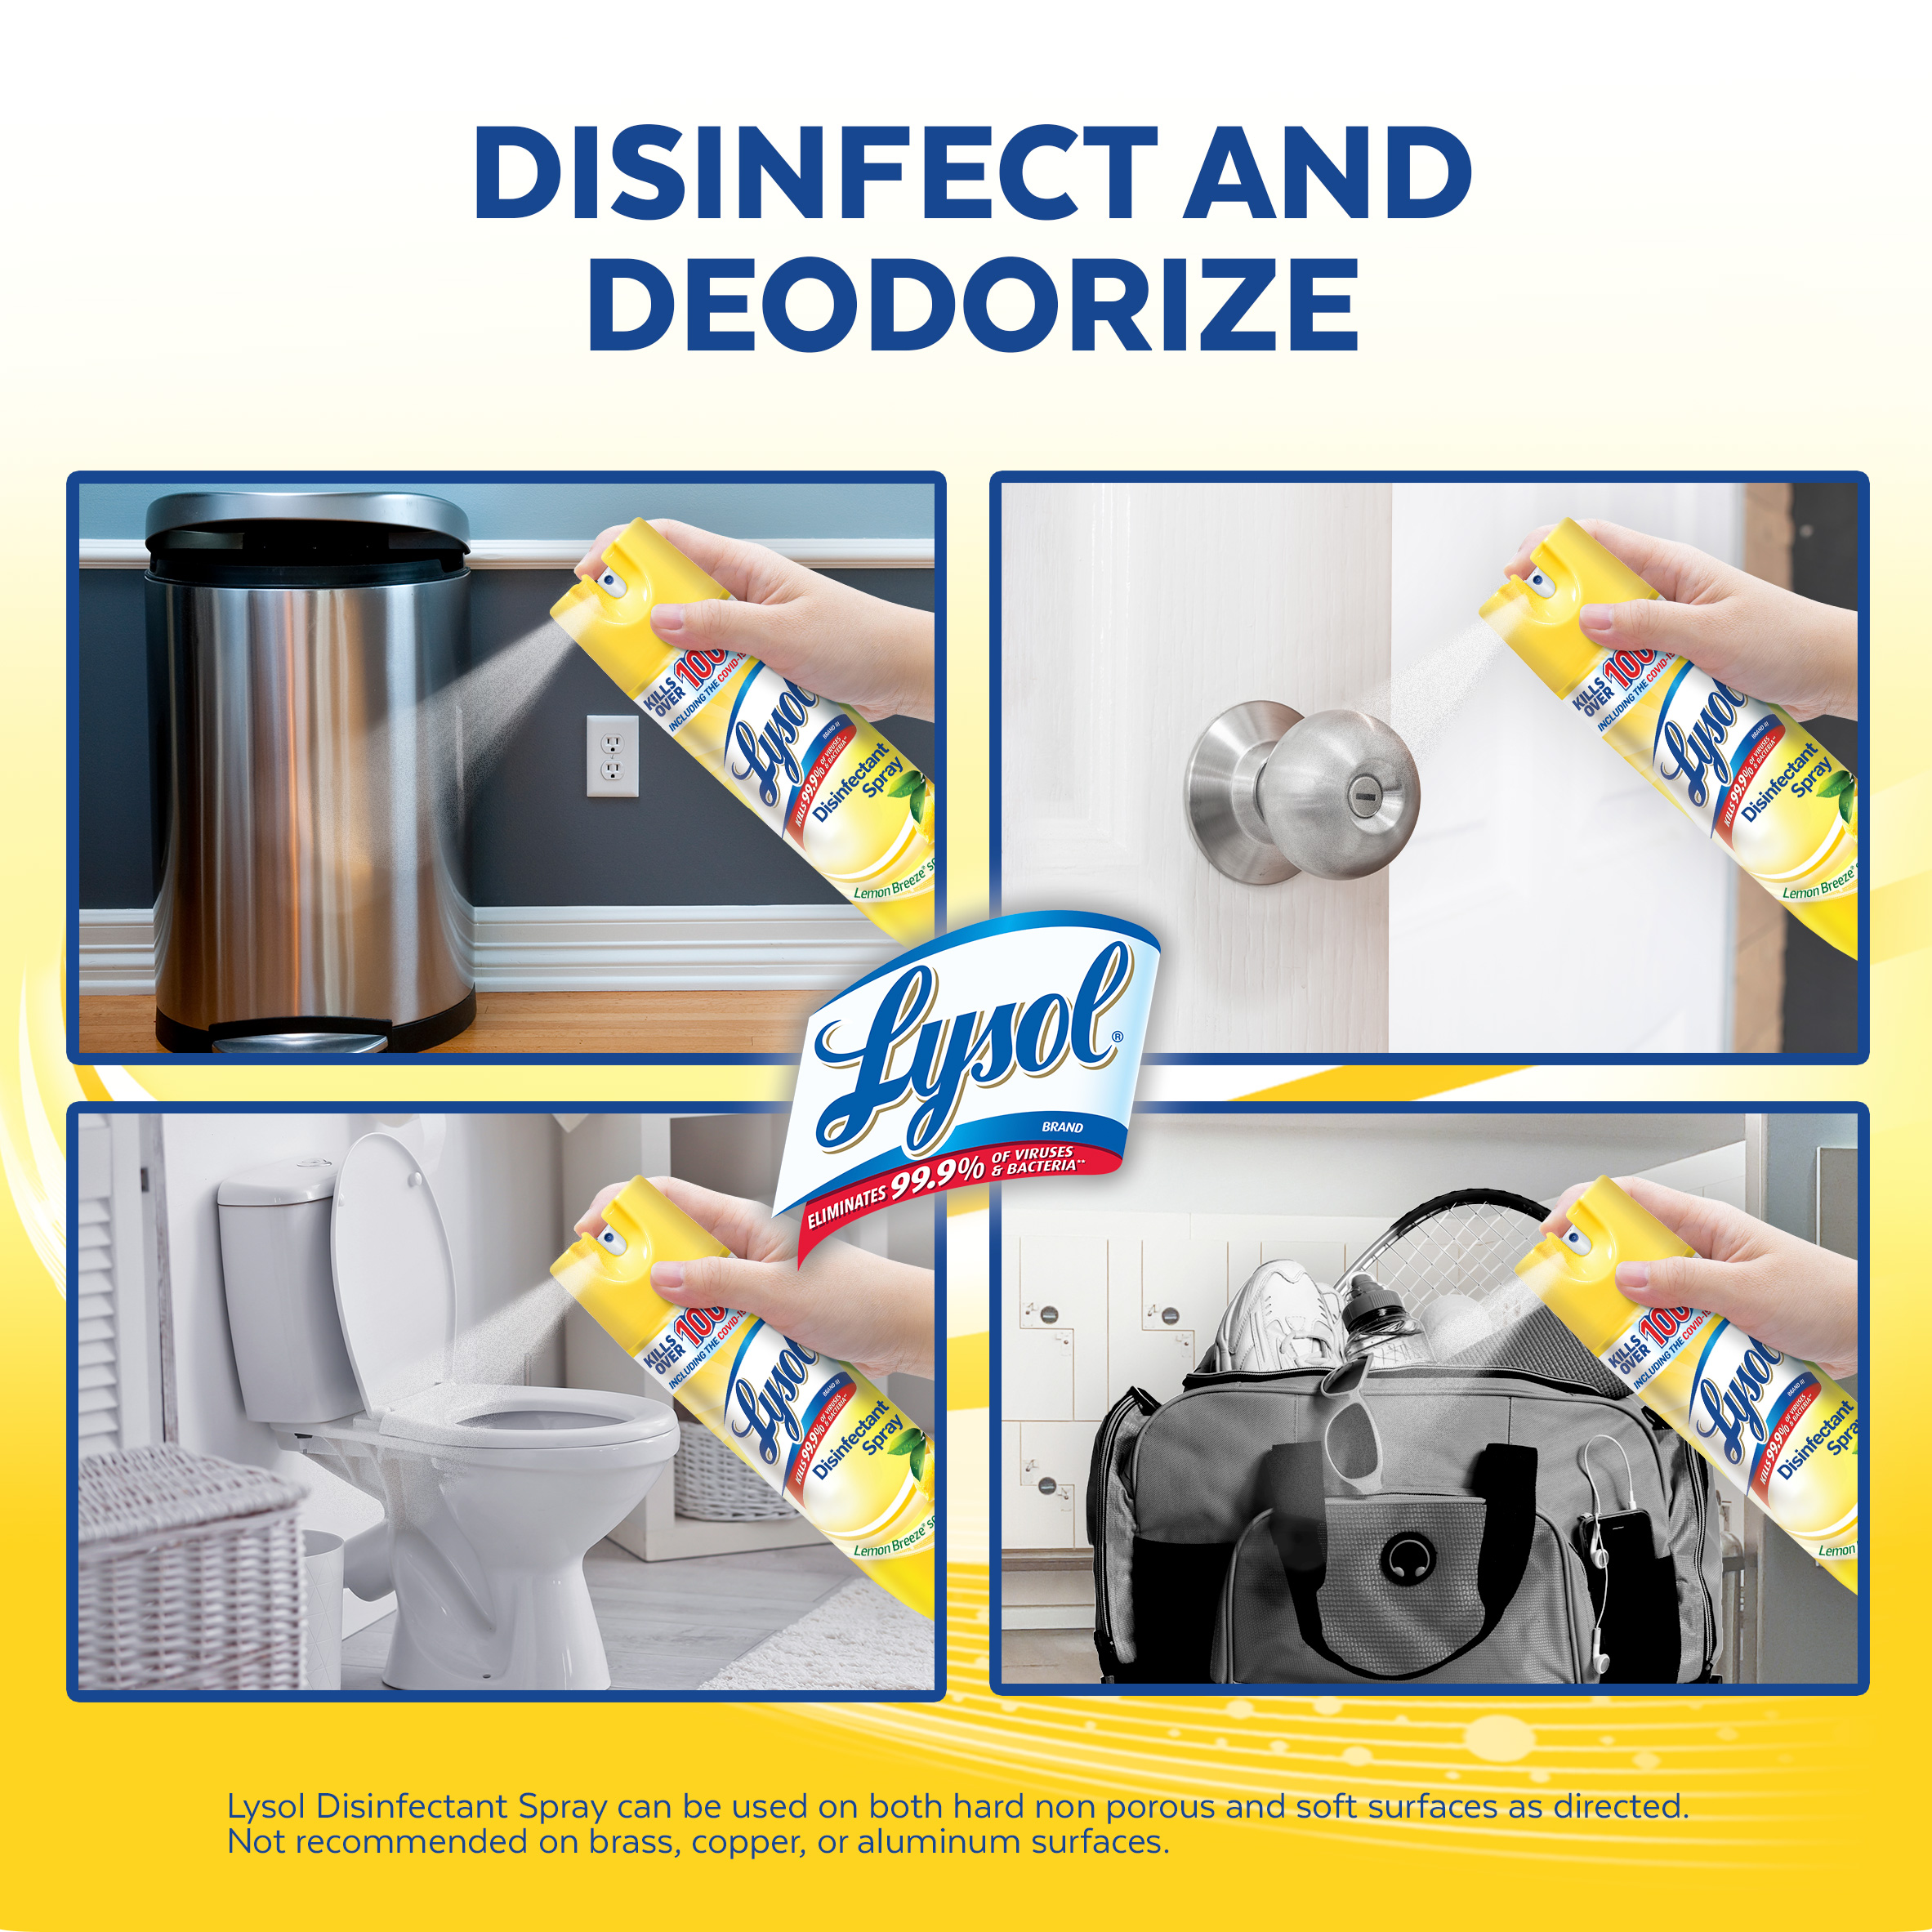 Lysol Disinfectant Spray, Lemon Breeze, 19oz, Tested and Proven to Kill COVID-19 Virus, Packaging May Vary​ - image 4 of 9